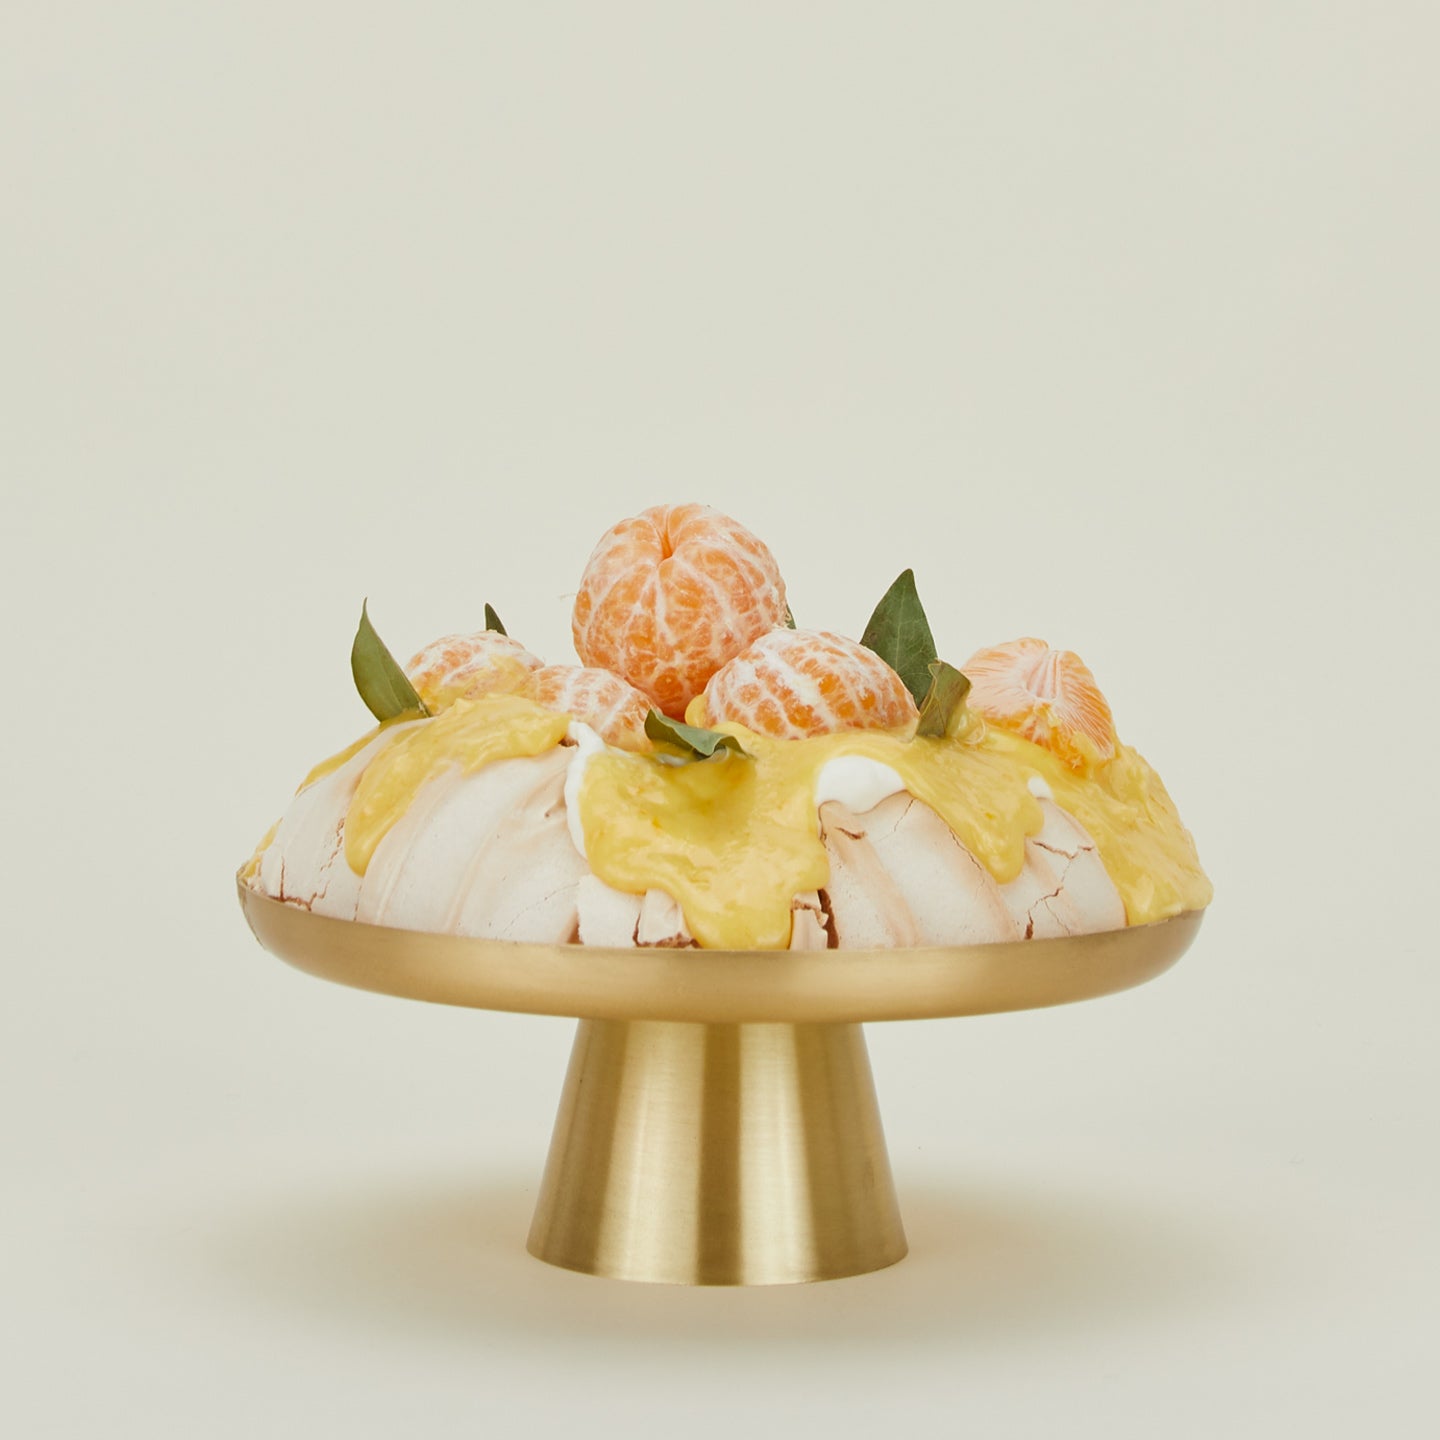 Brass Cake Stand in Large with citrus garnished pavlova.